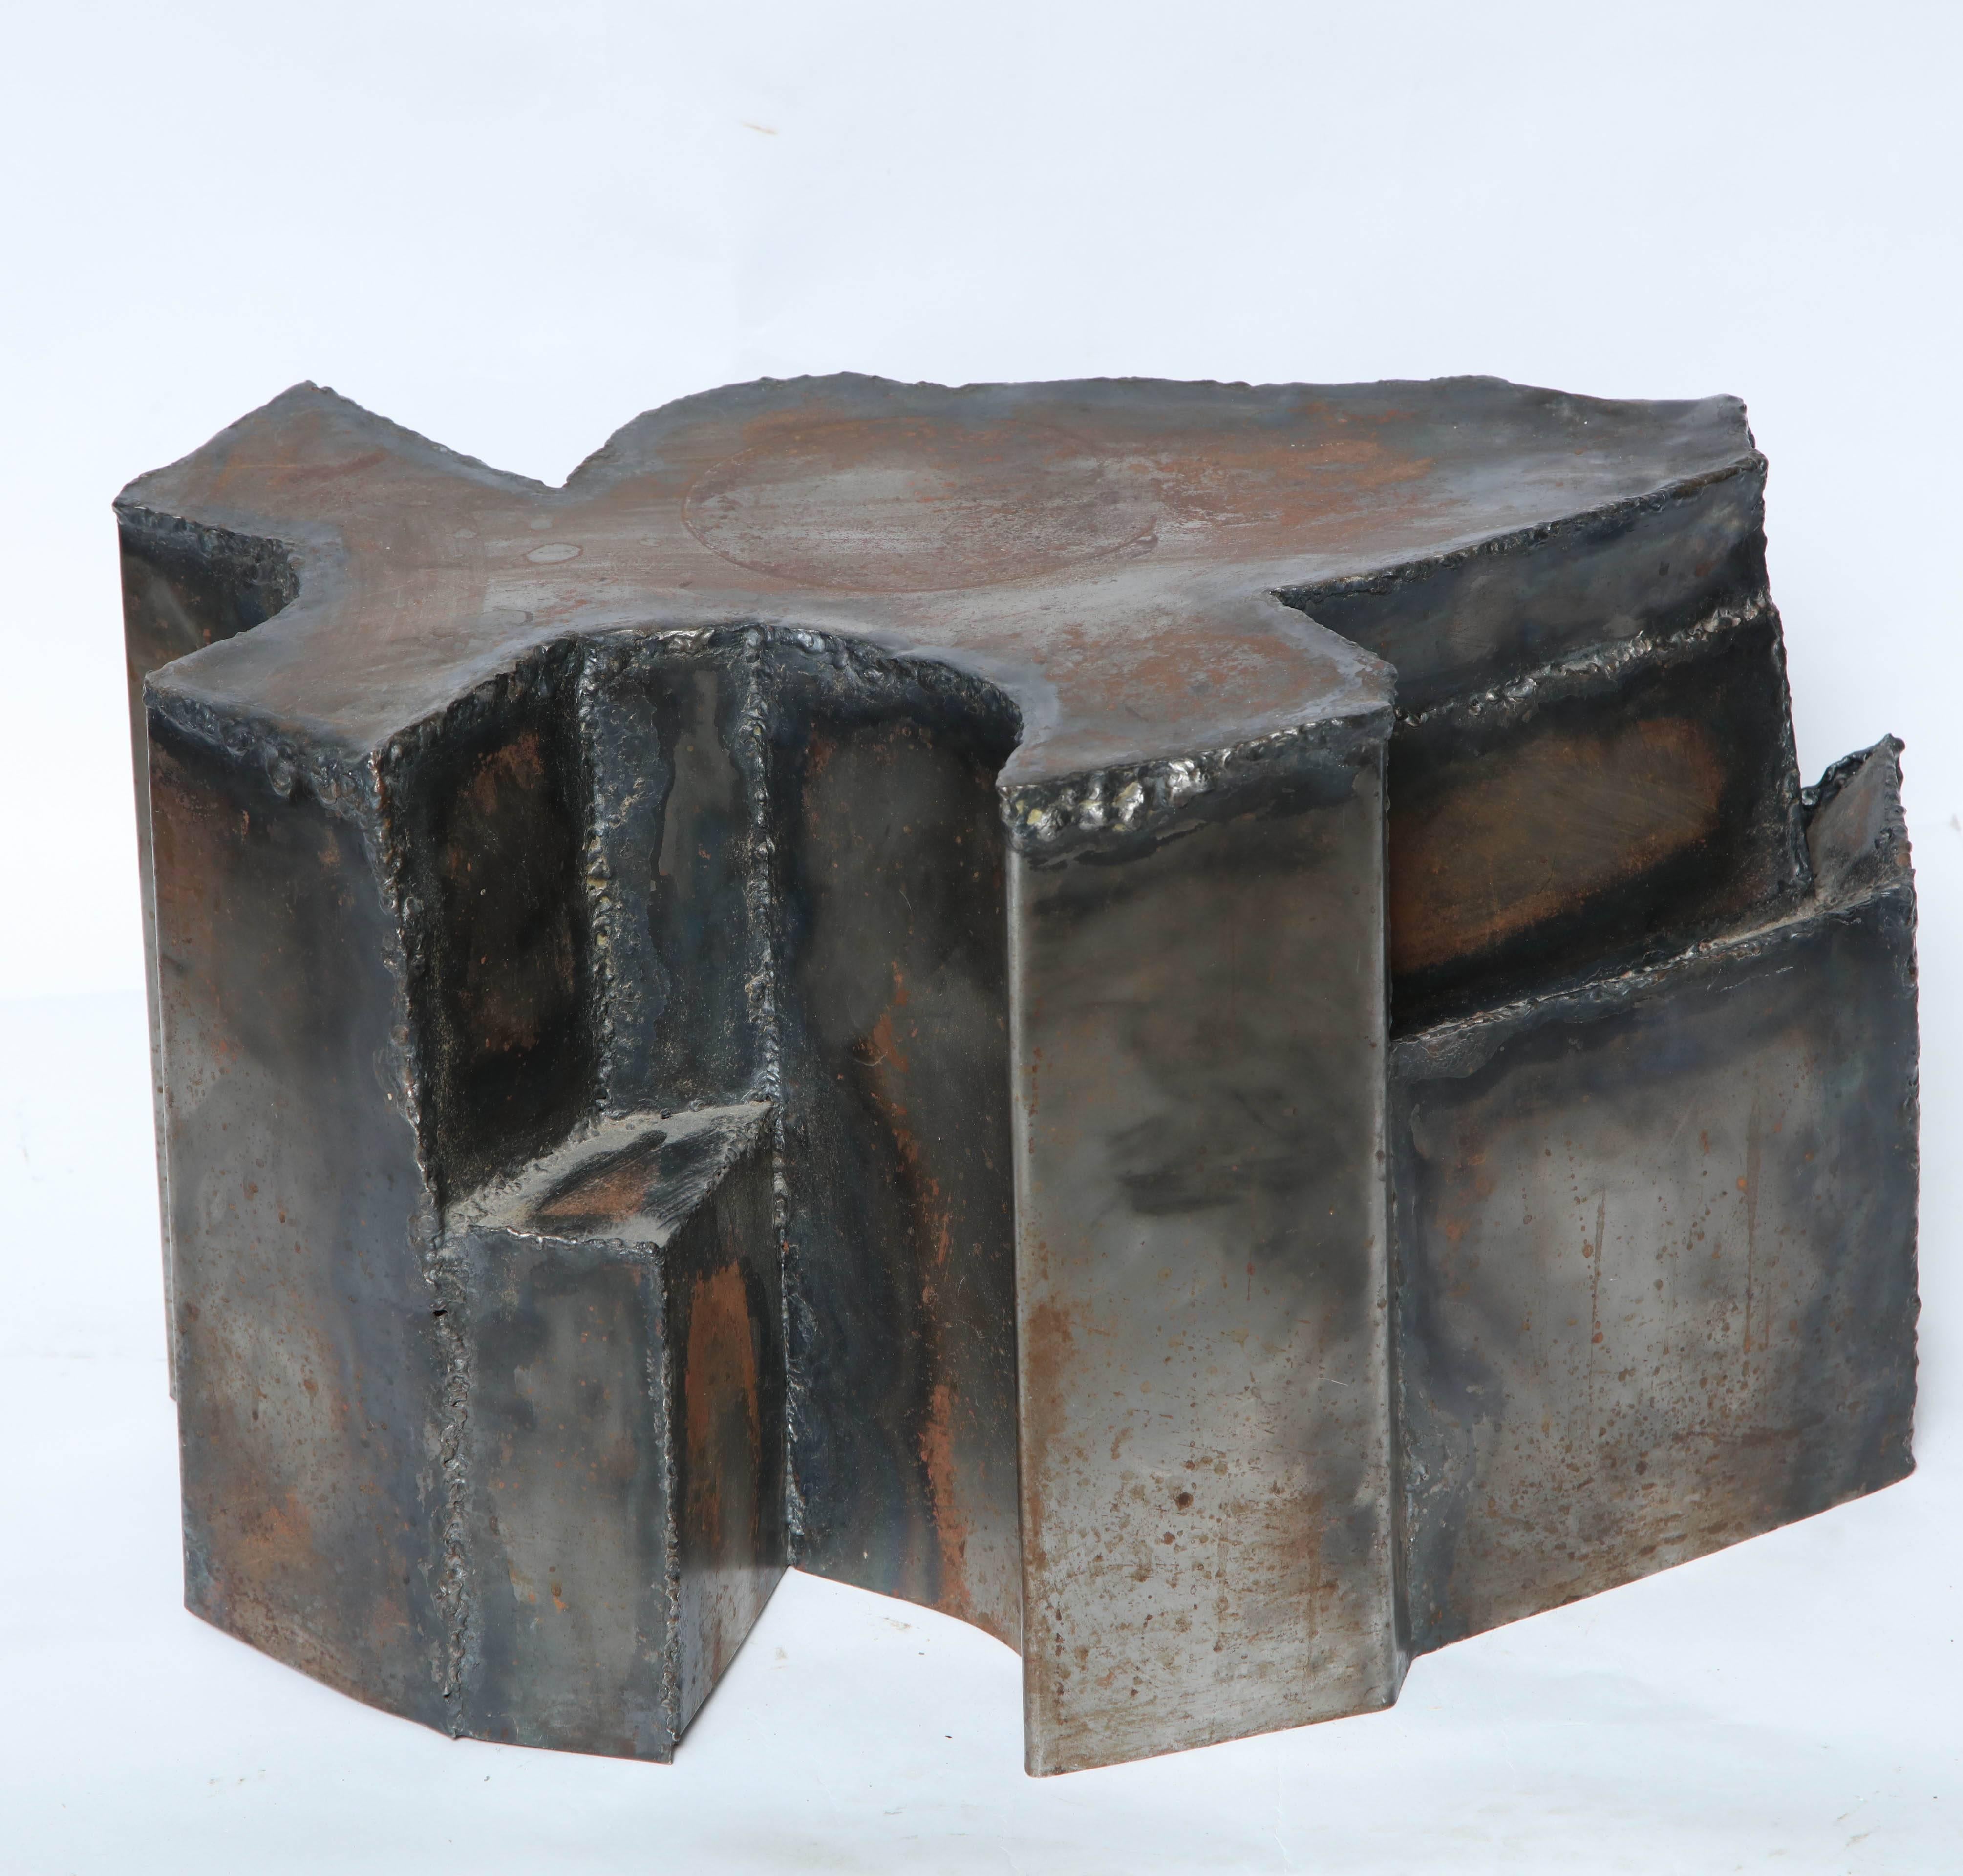 A Brutalist Mid-Century Modern sculptural handcrafted patinated metal end table.